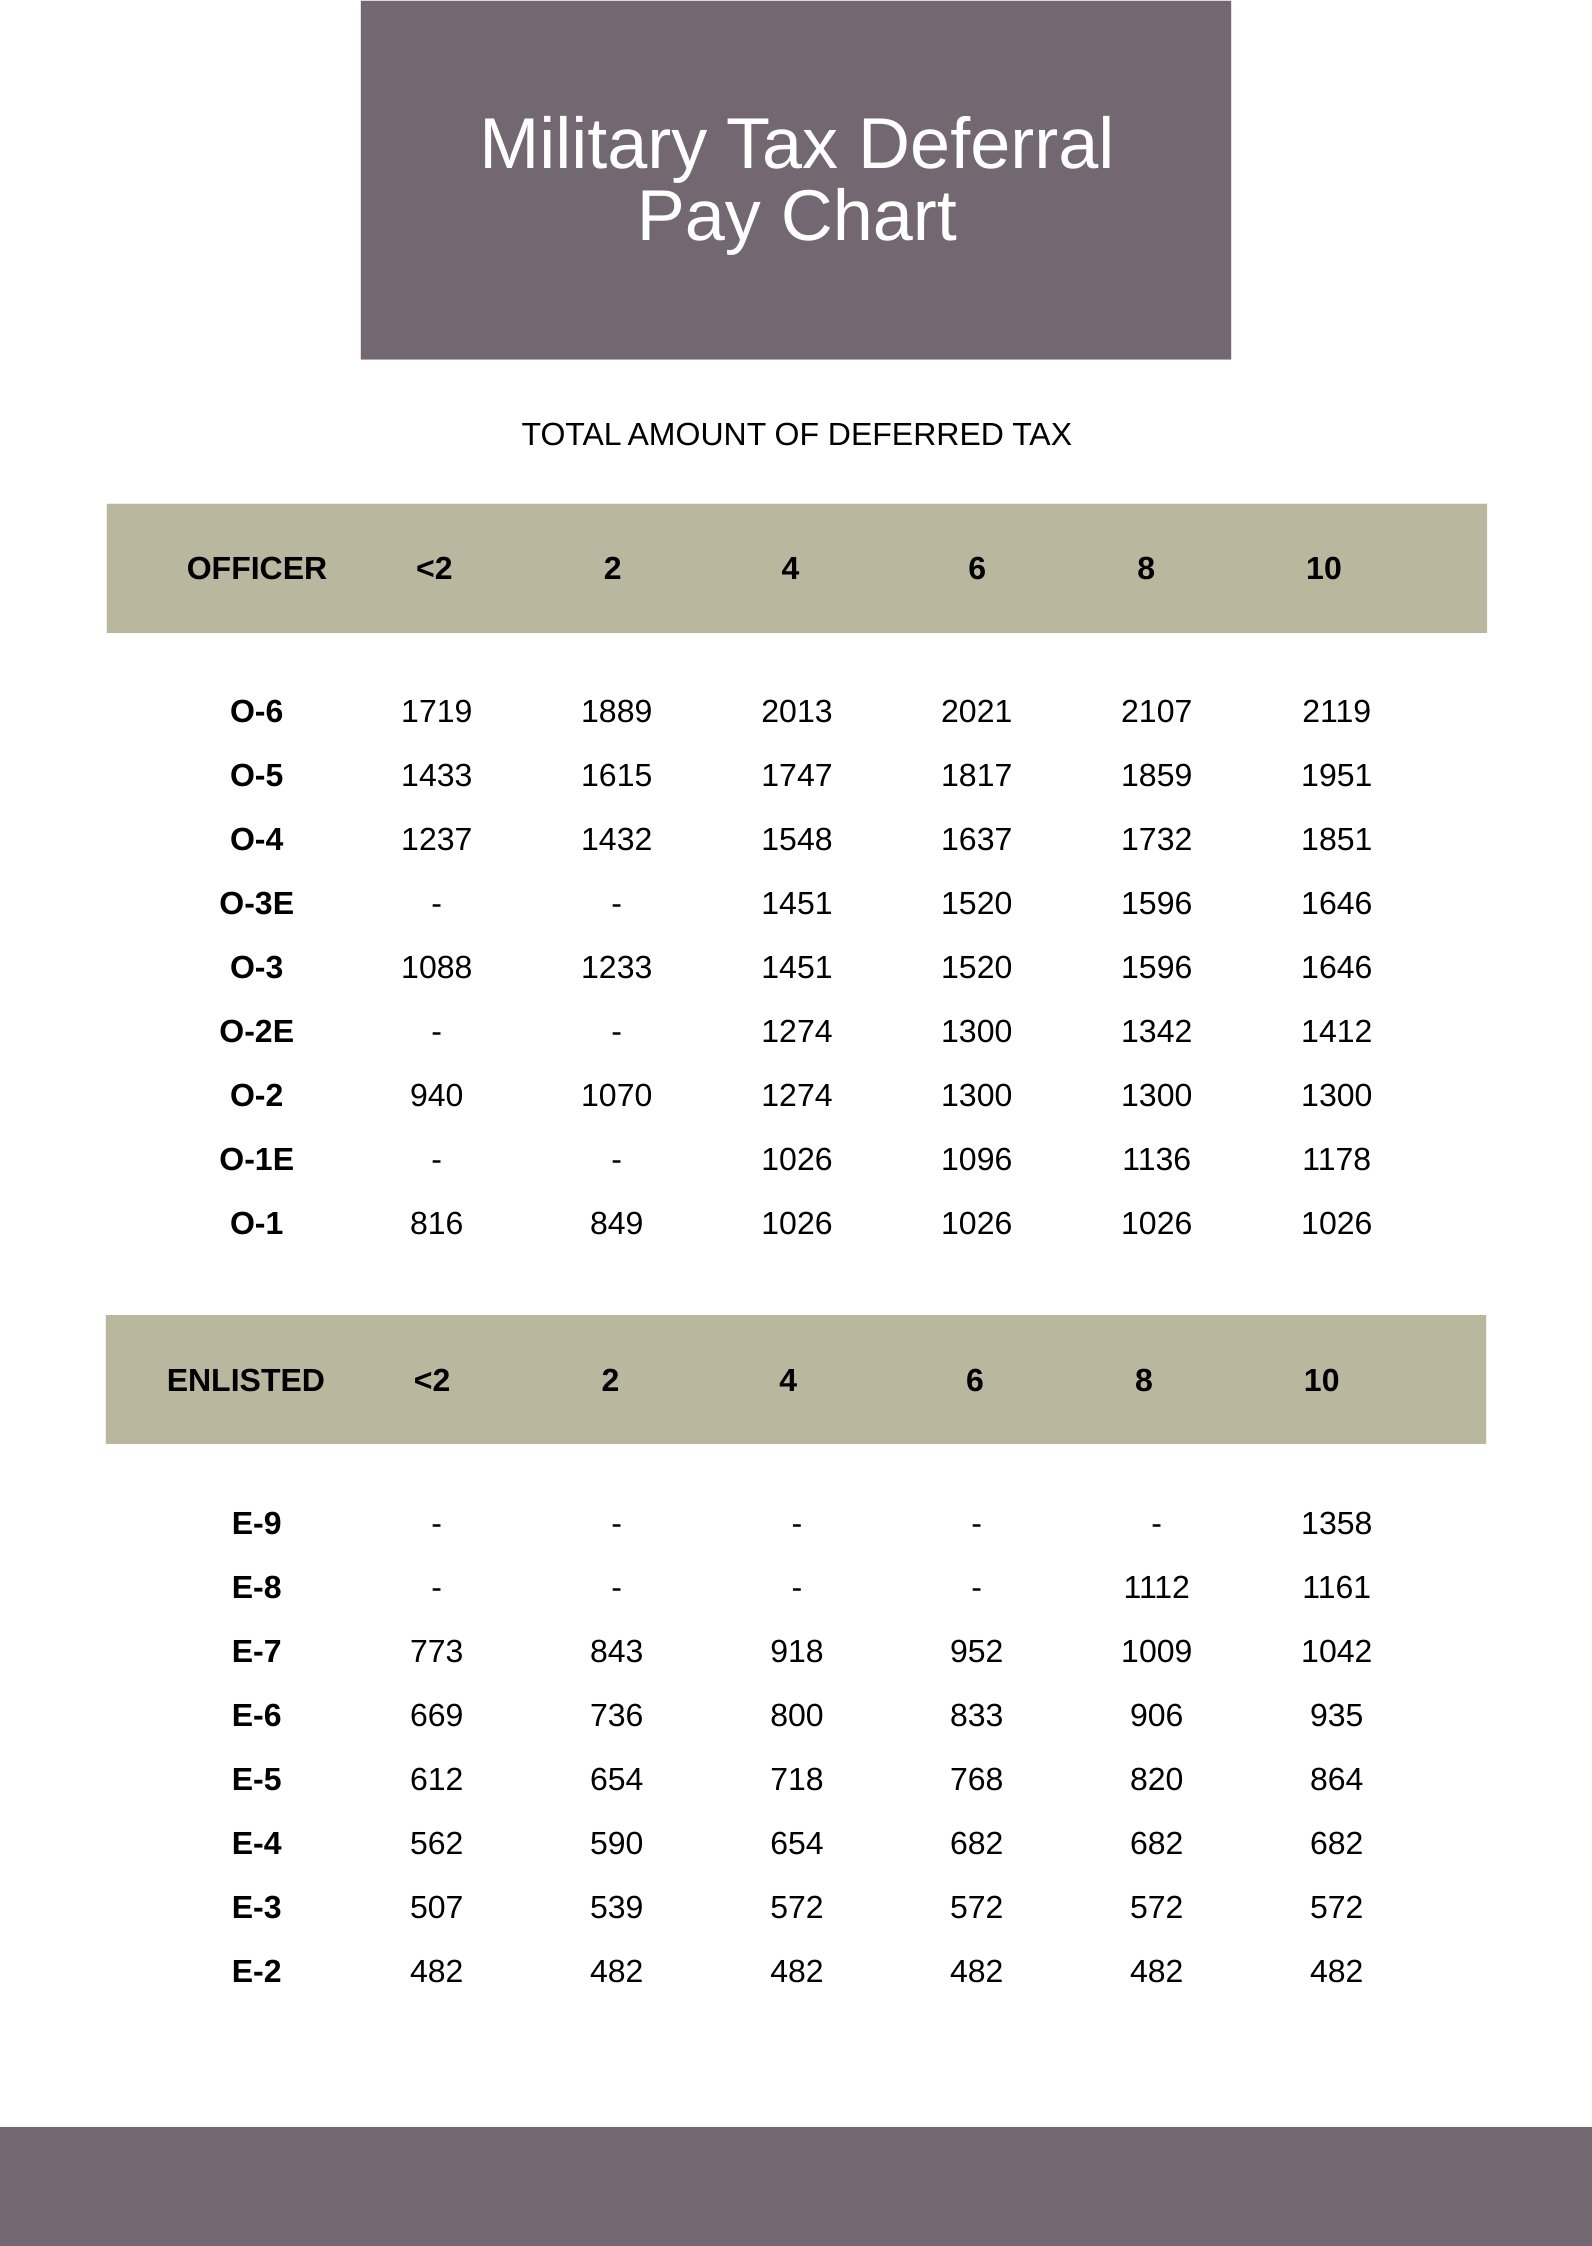 Military Tax Deferral Pay Chart